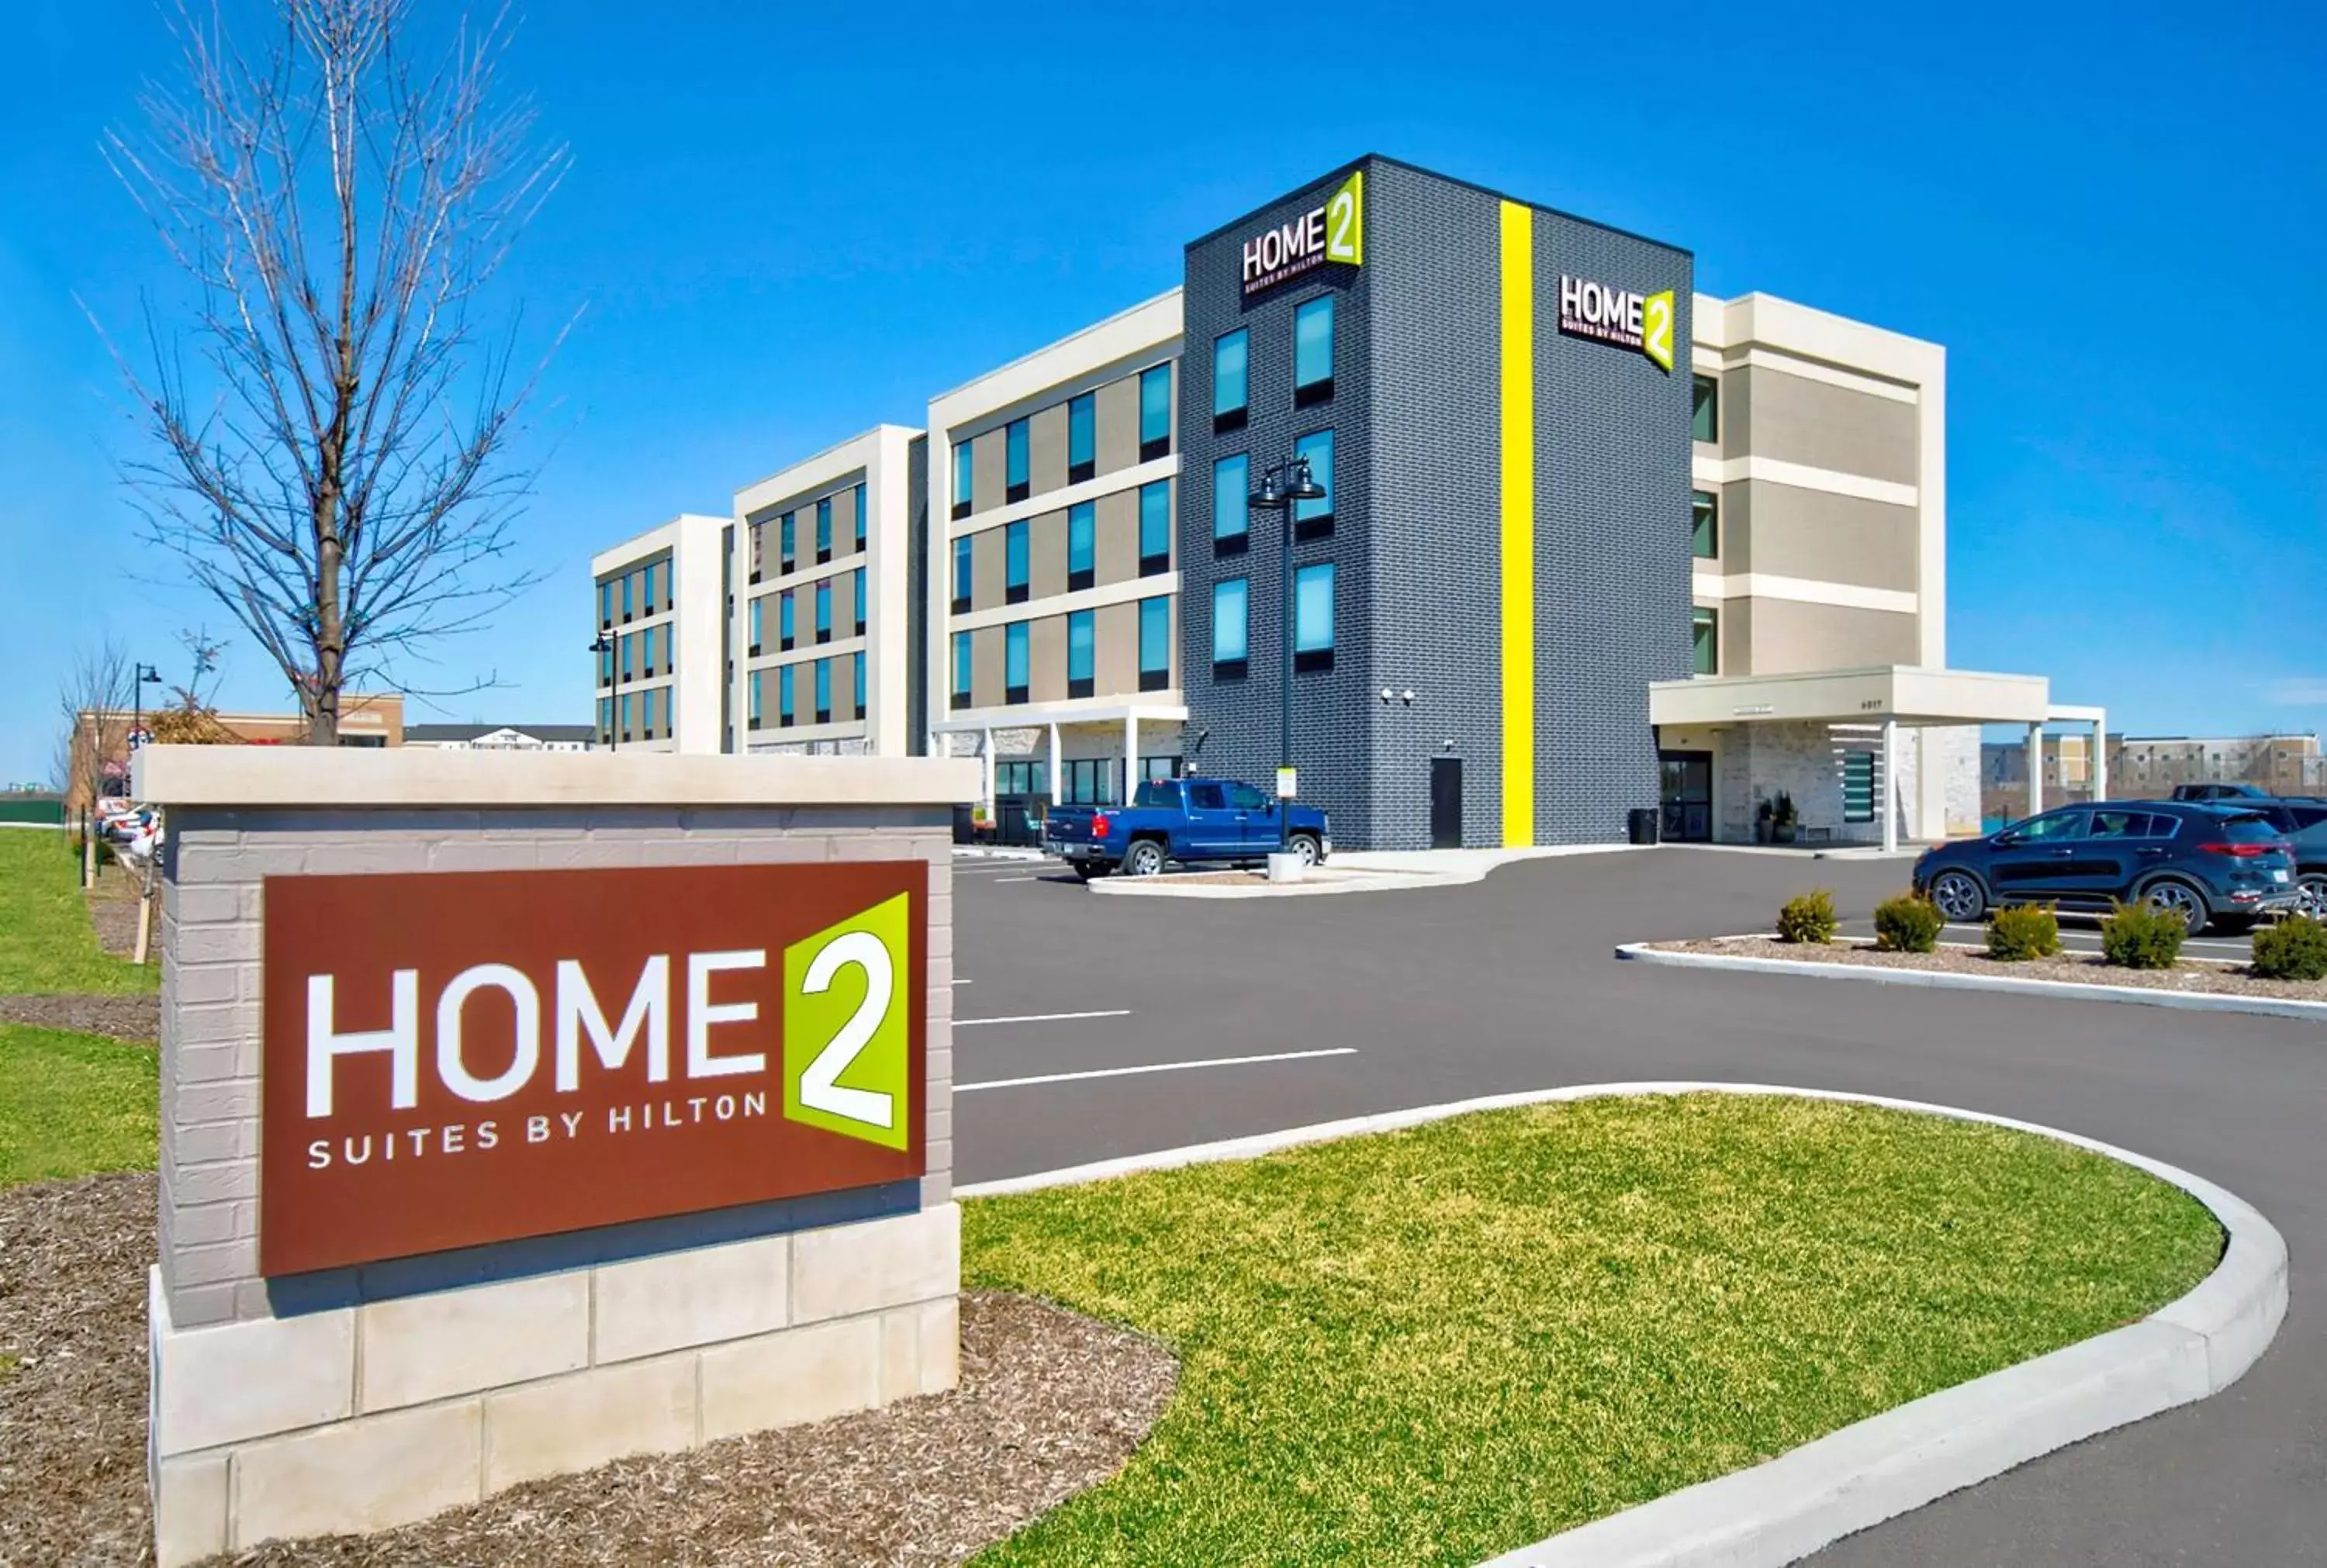 Property Building in Home2 Suites By Hilton Whitestown Indianapolis Nw